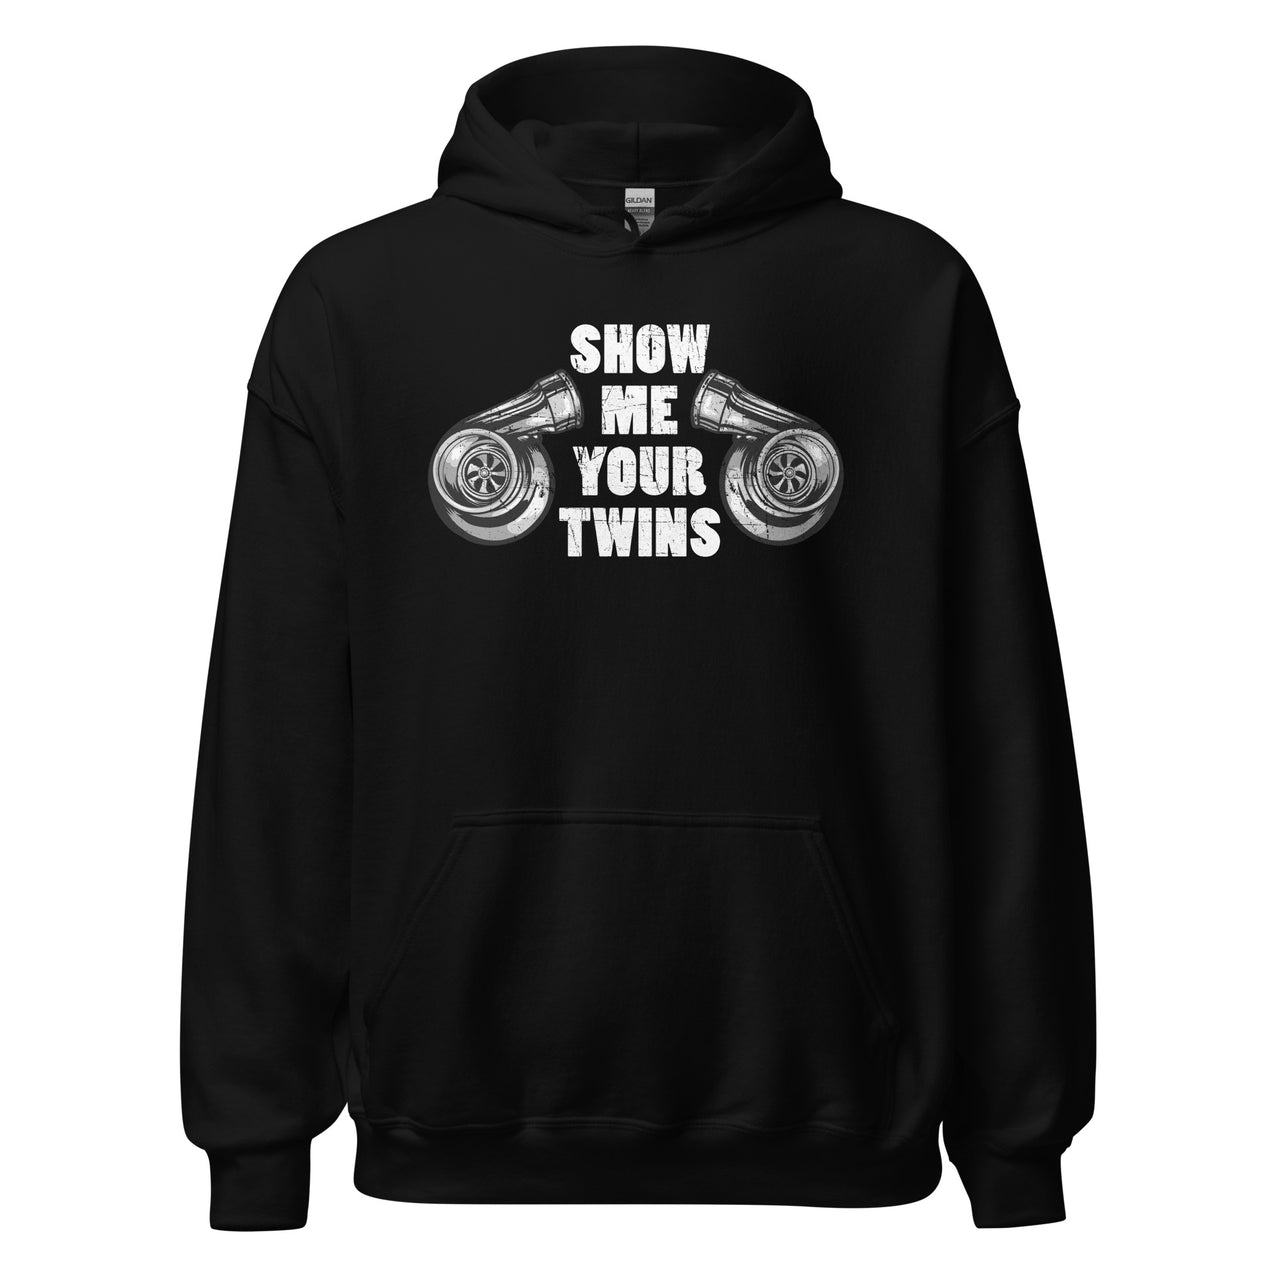 Show Me Your Twins Turbo Hoodie in black